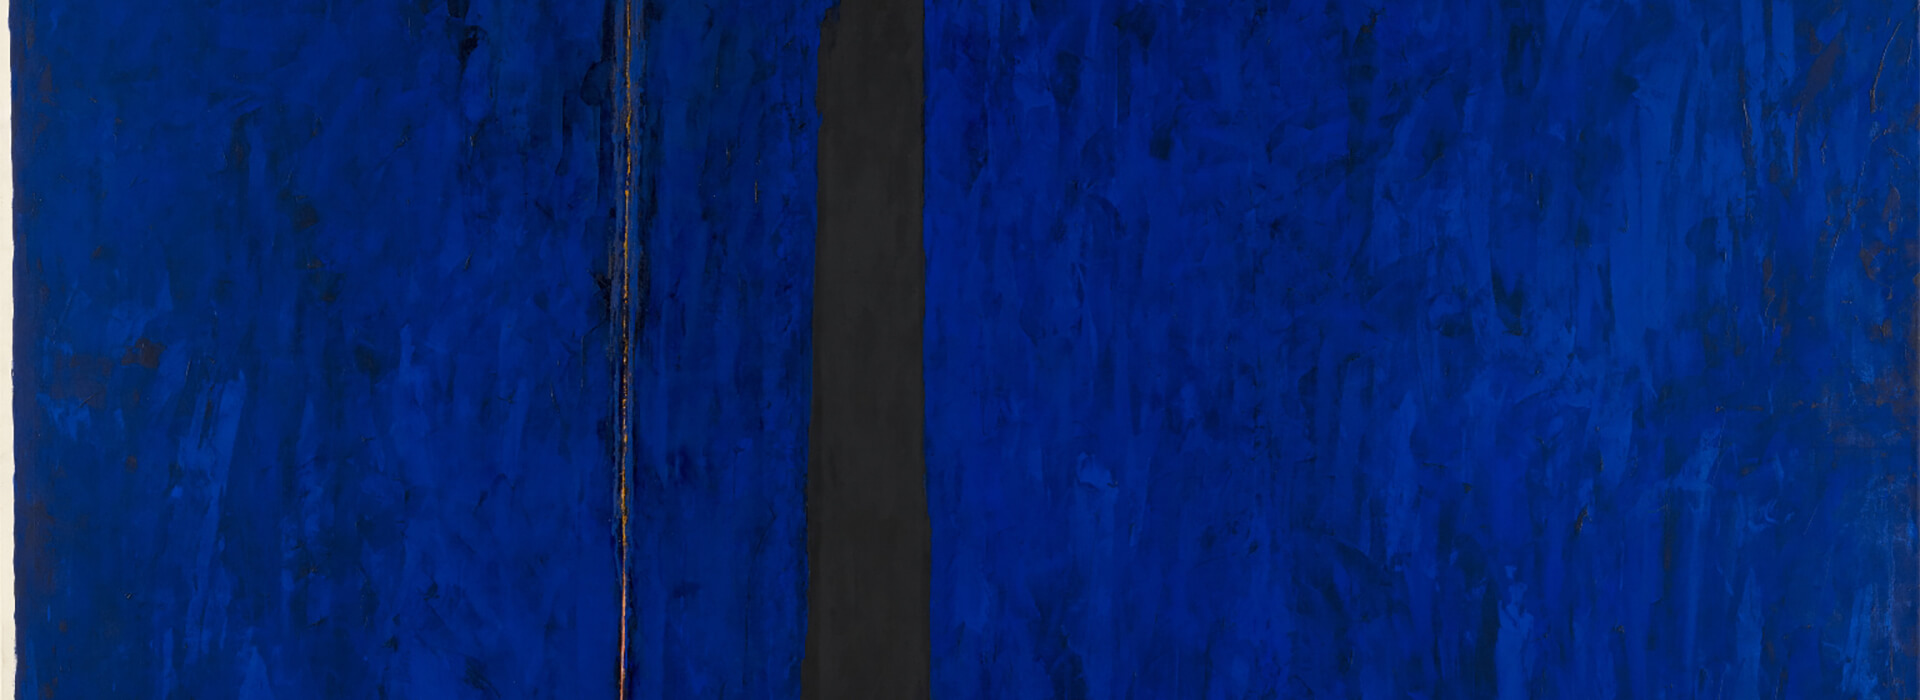 Large abstract blue painting with a black and orange lifeline